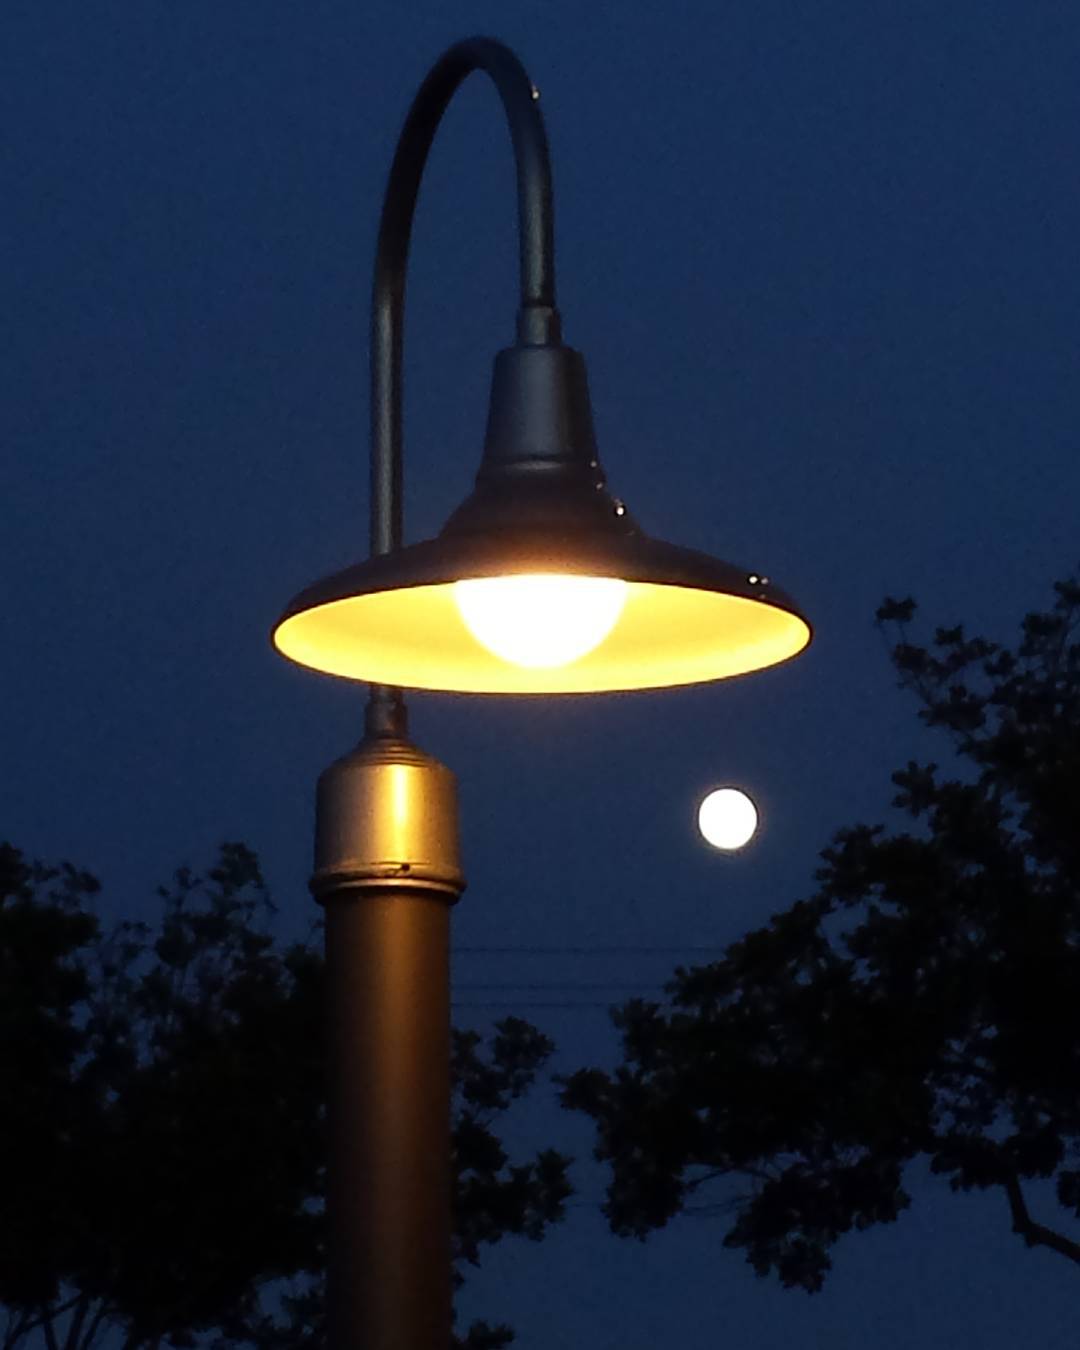 That’s right, I don’t have to crop everything anymore! #Lamppost #Moon, mark II